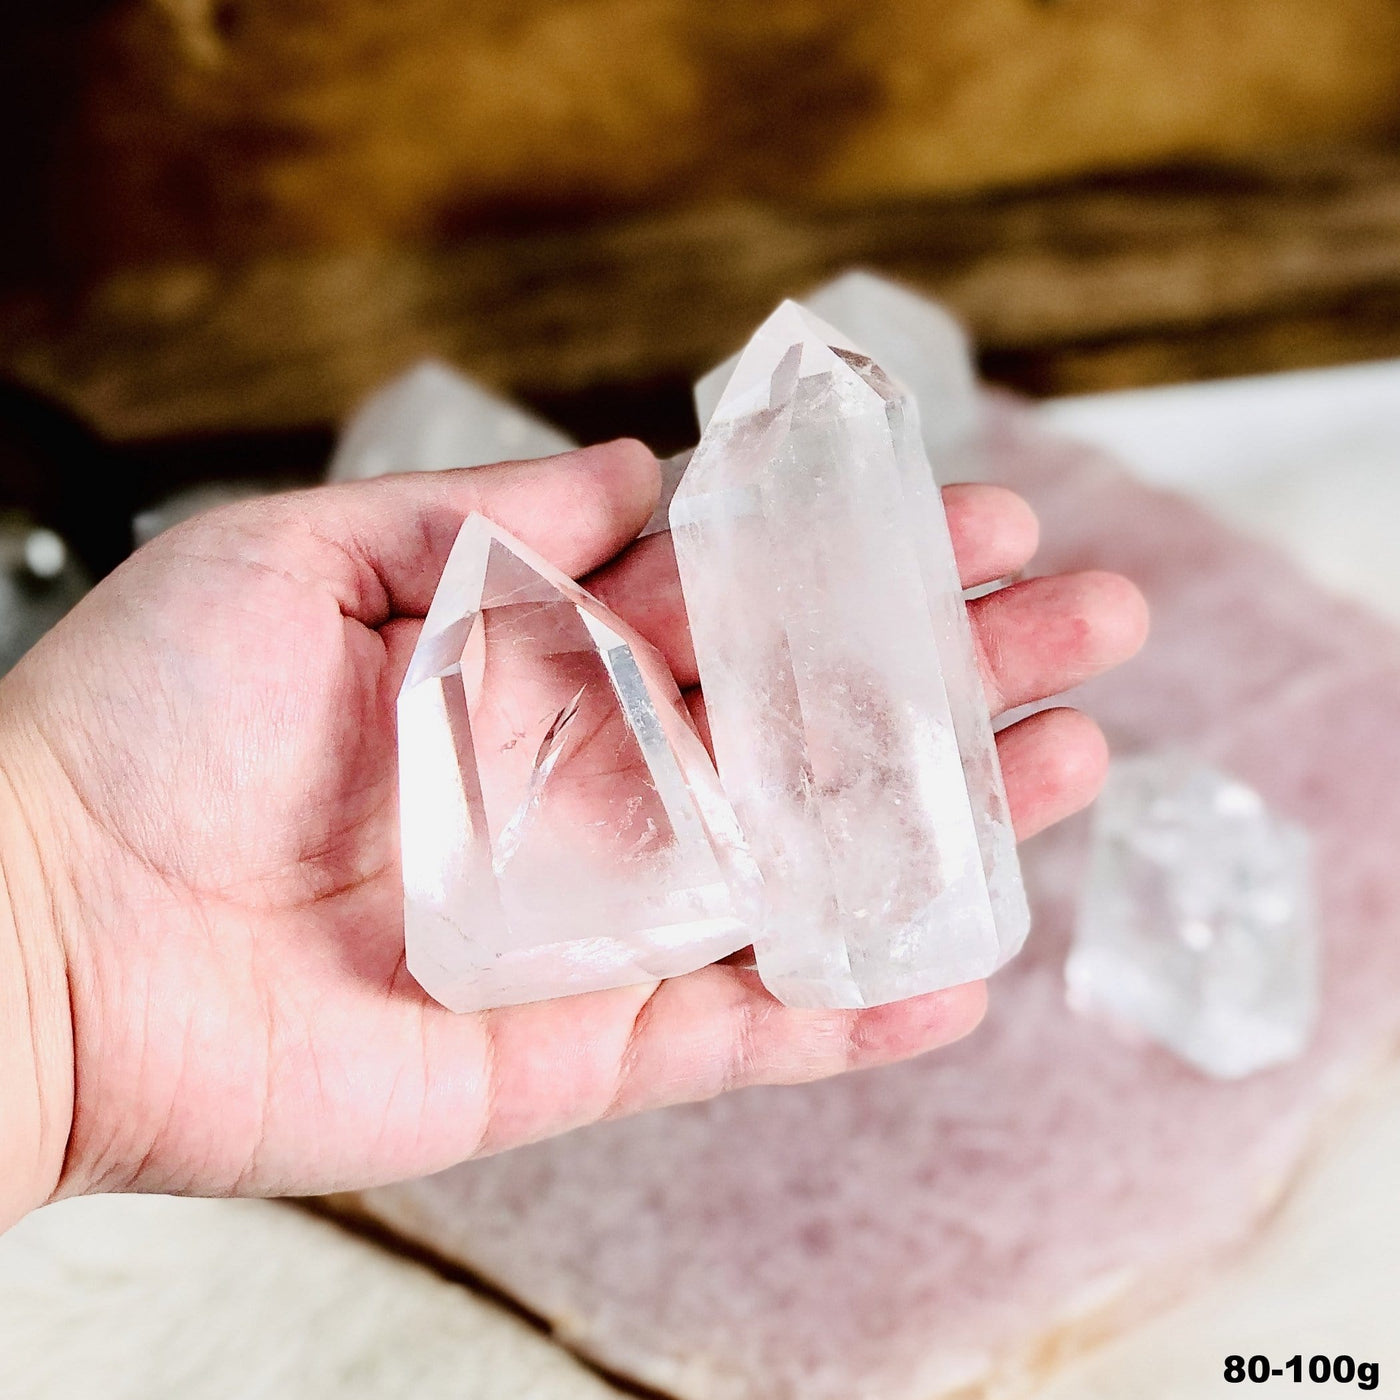 Crystal Quartz Polished Cut Base Points in a hand in the 80-100g size